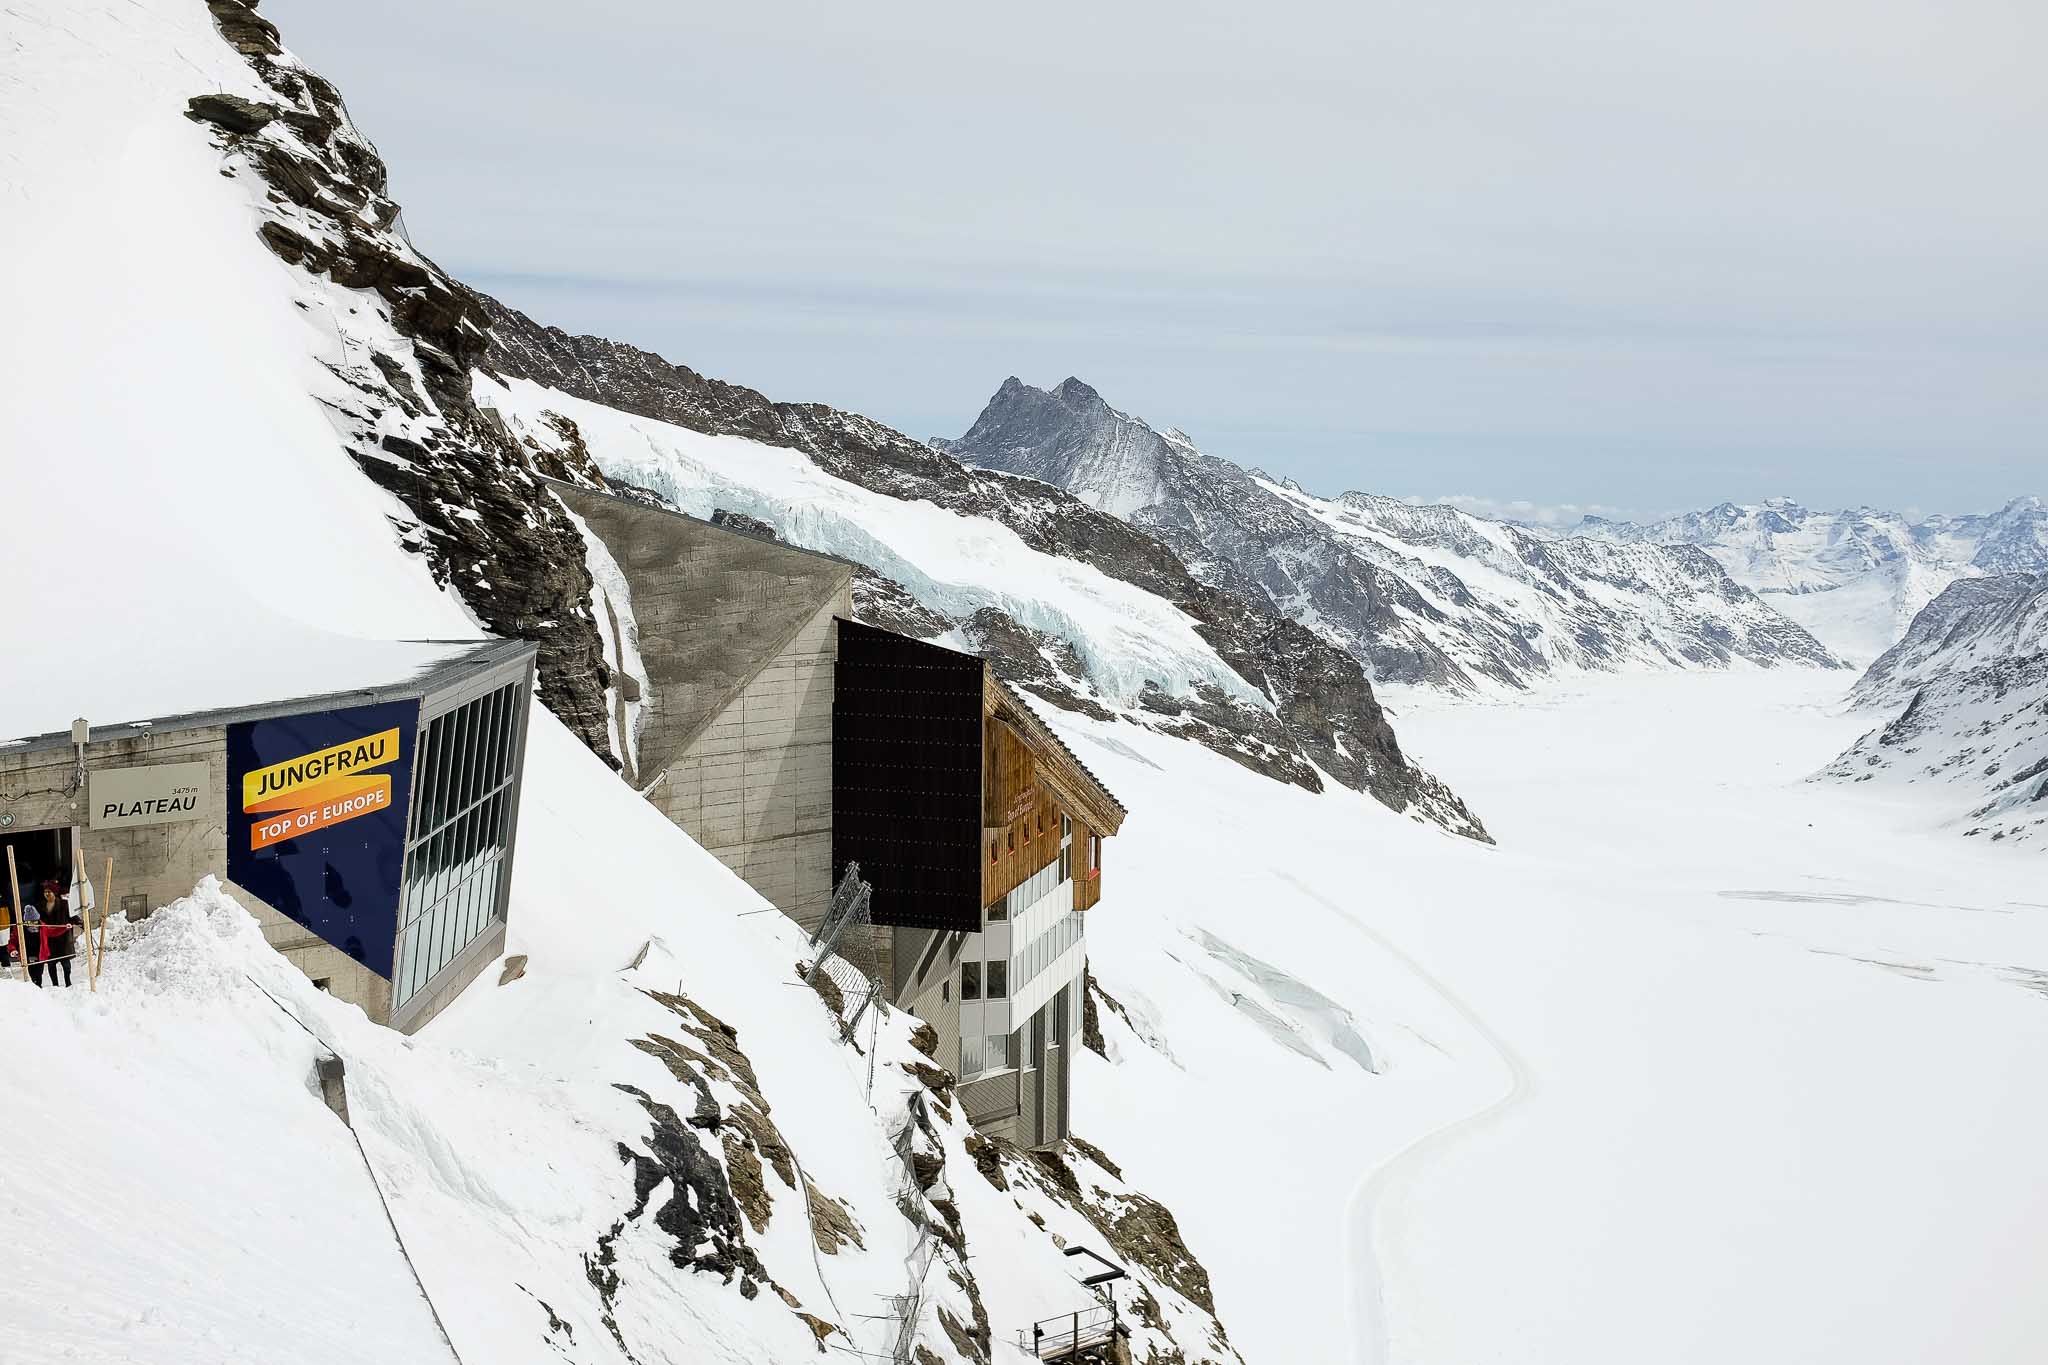 view of the Jungfraujoch and the Aletsch Glacier